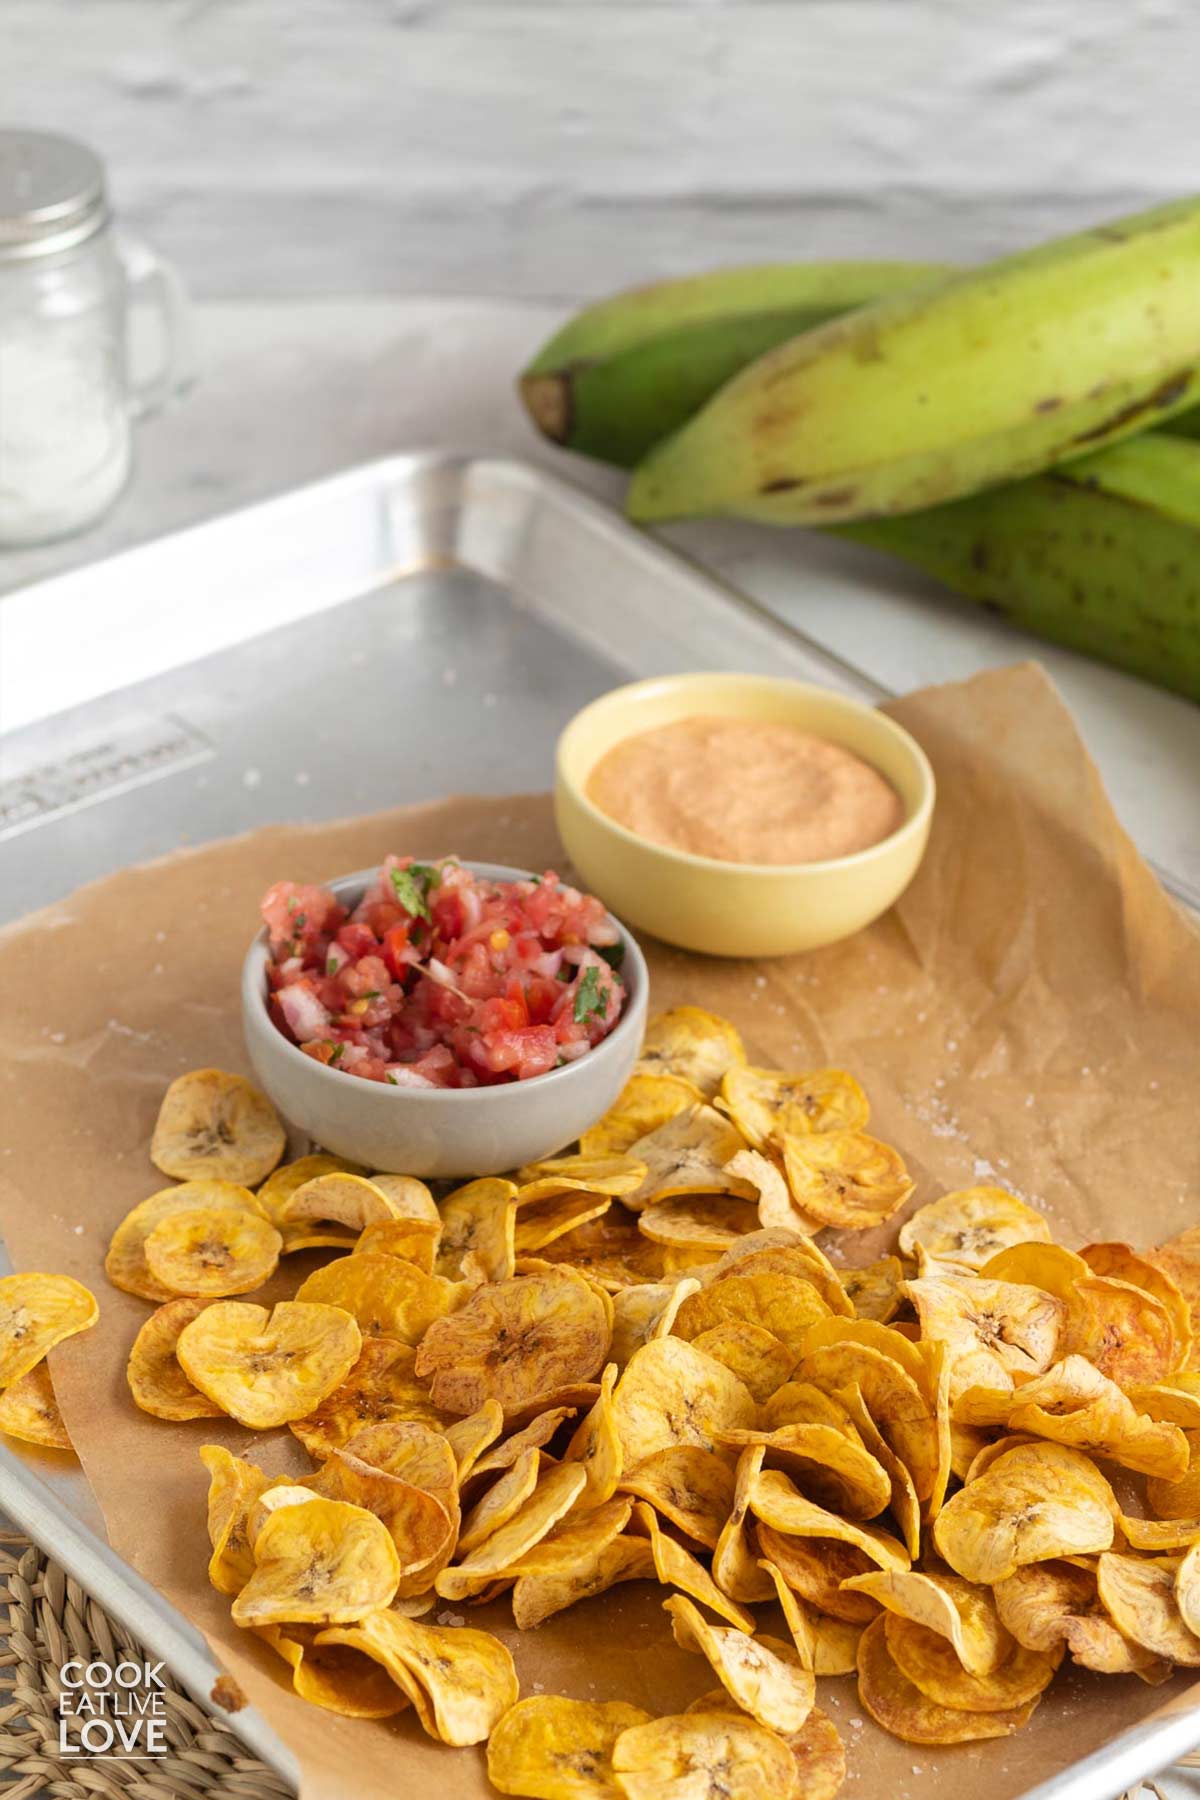 Paleo plantain chips on a baking tray with salsa and creamy sauce in the background.